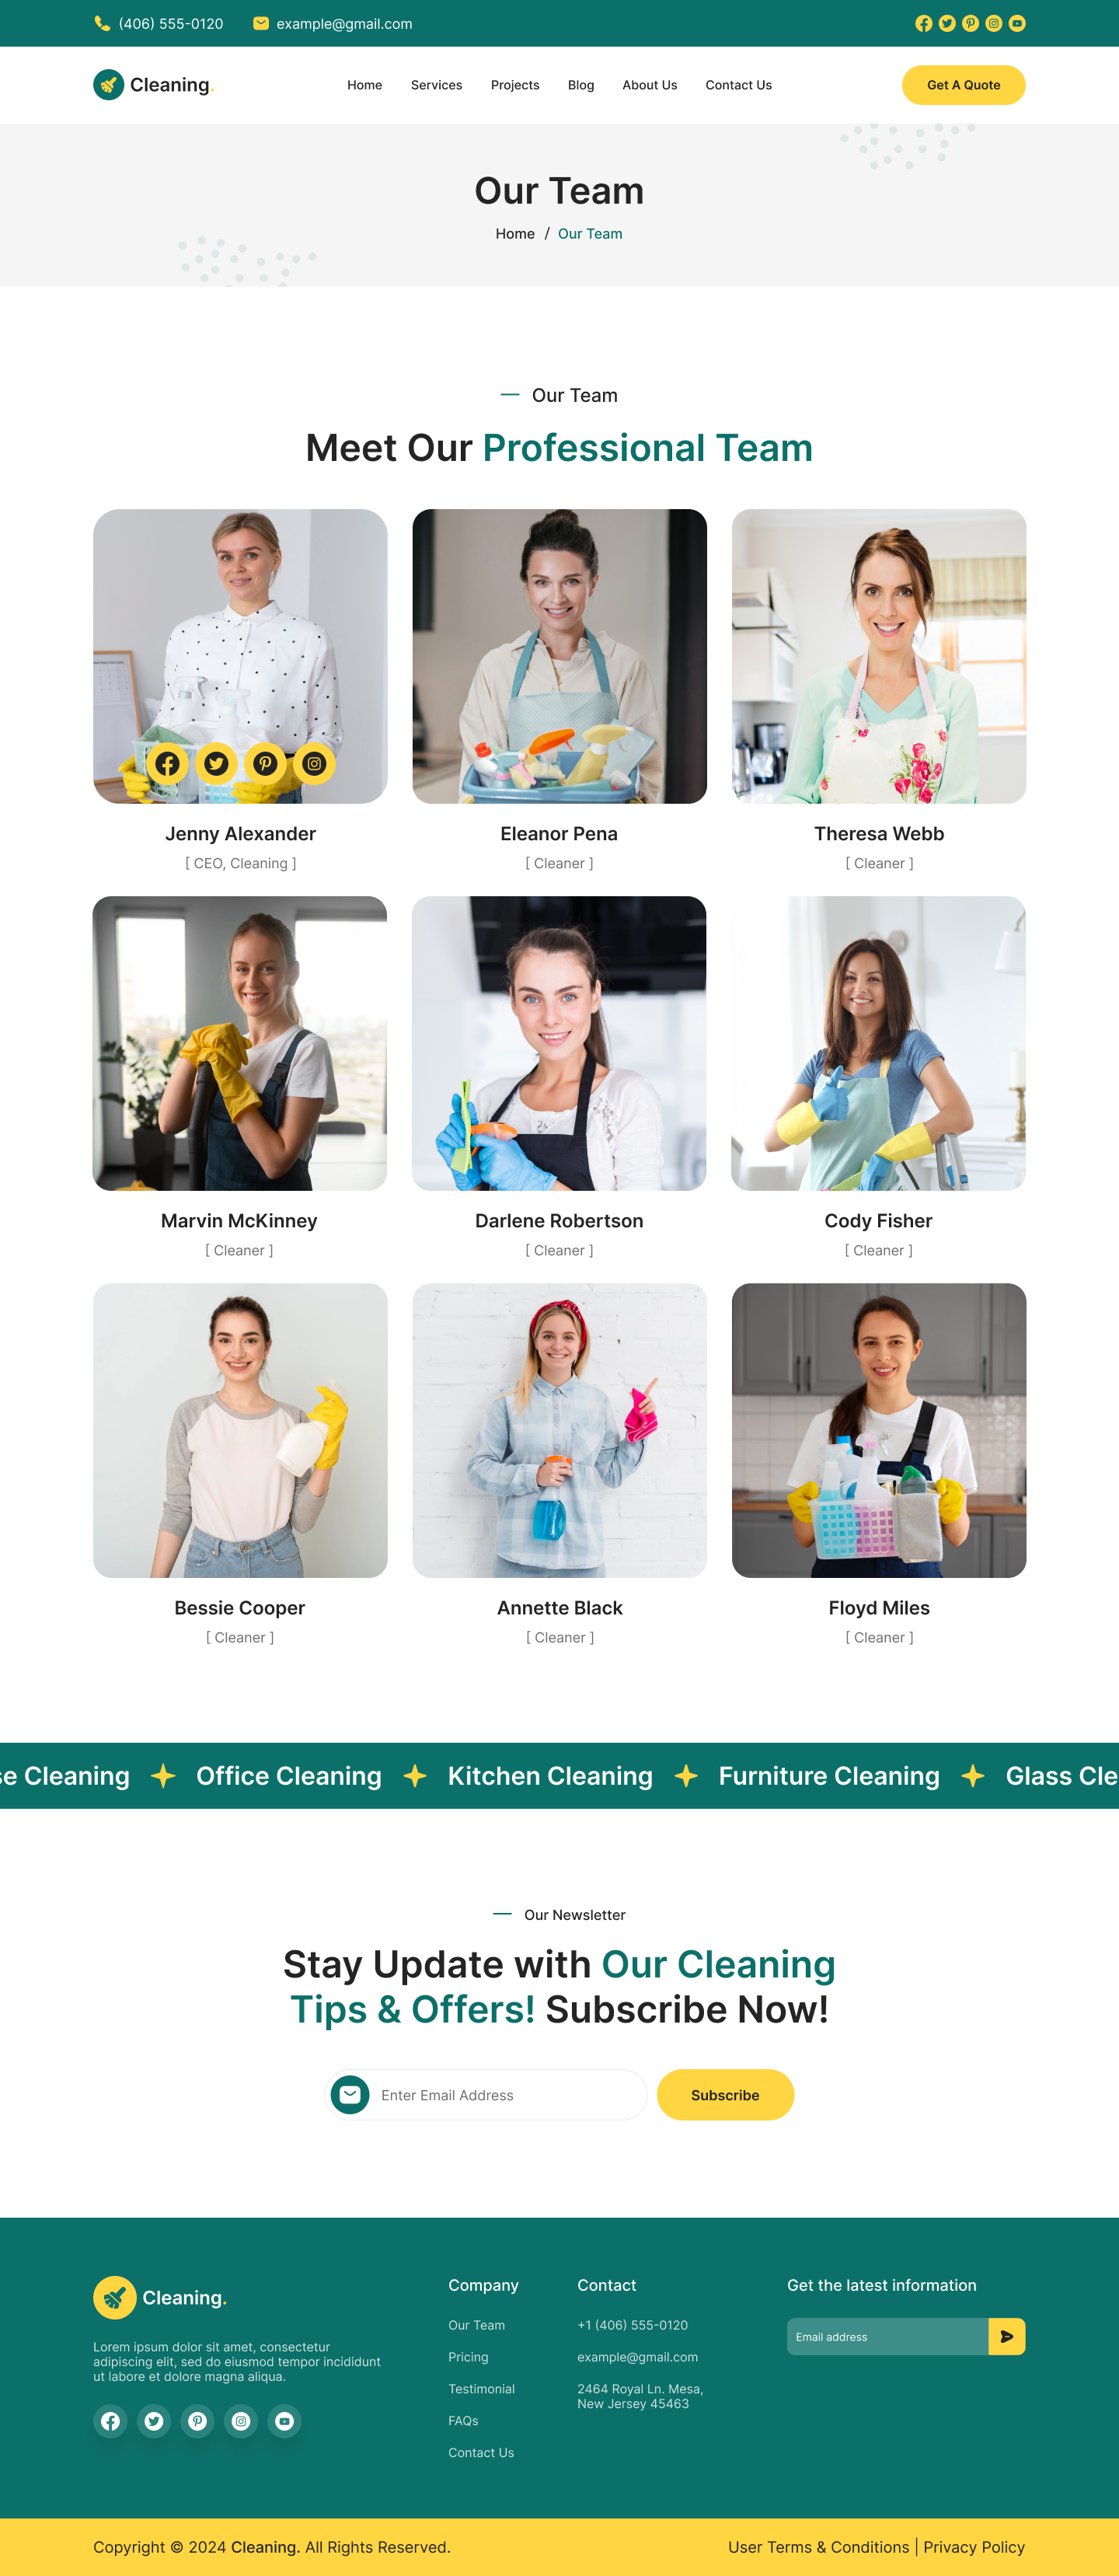 cleaning service website Our Team Page figma design